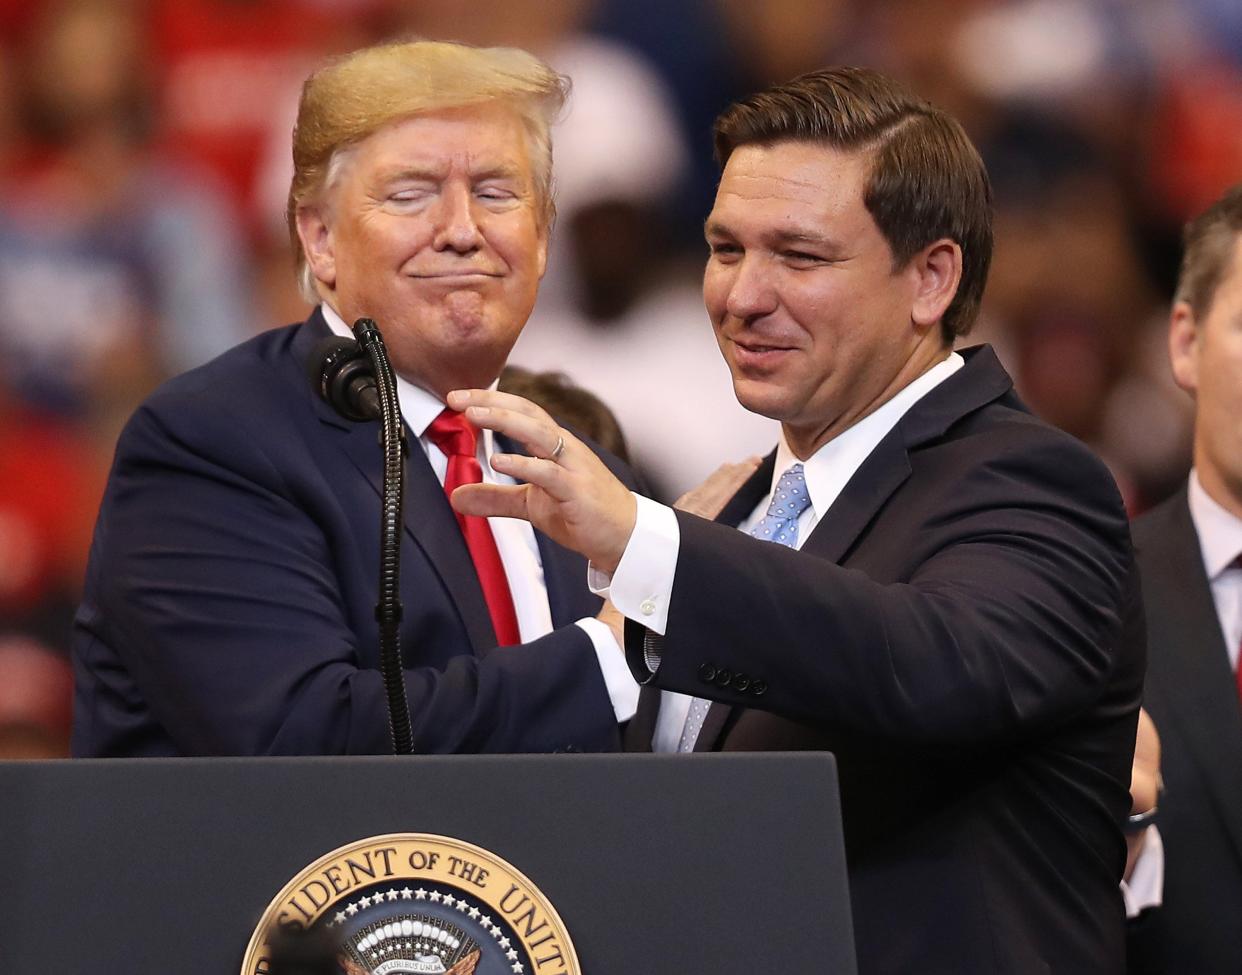 President Donald Trump, left, introduces Florida Gov. Ron DeSantis during a homecoming campaign rally at the BB&T Center on November 26, 2019, in Sunrise, Fla. (Joe Raedle/Getty Images/TNS) 